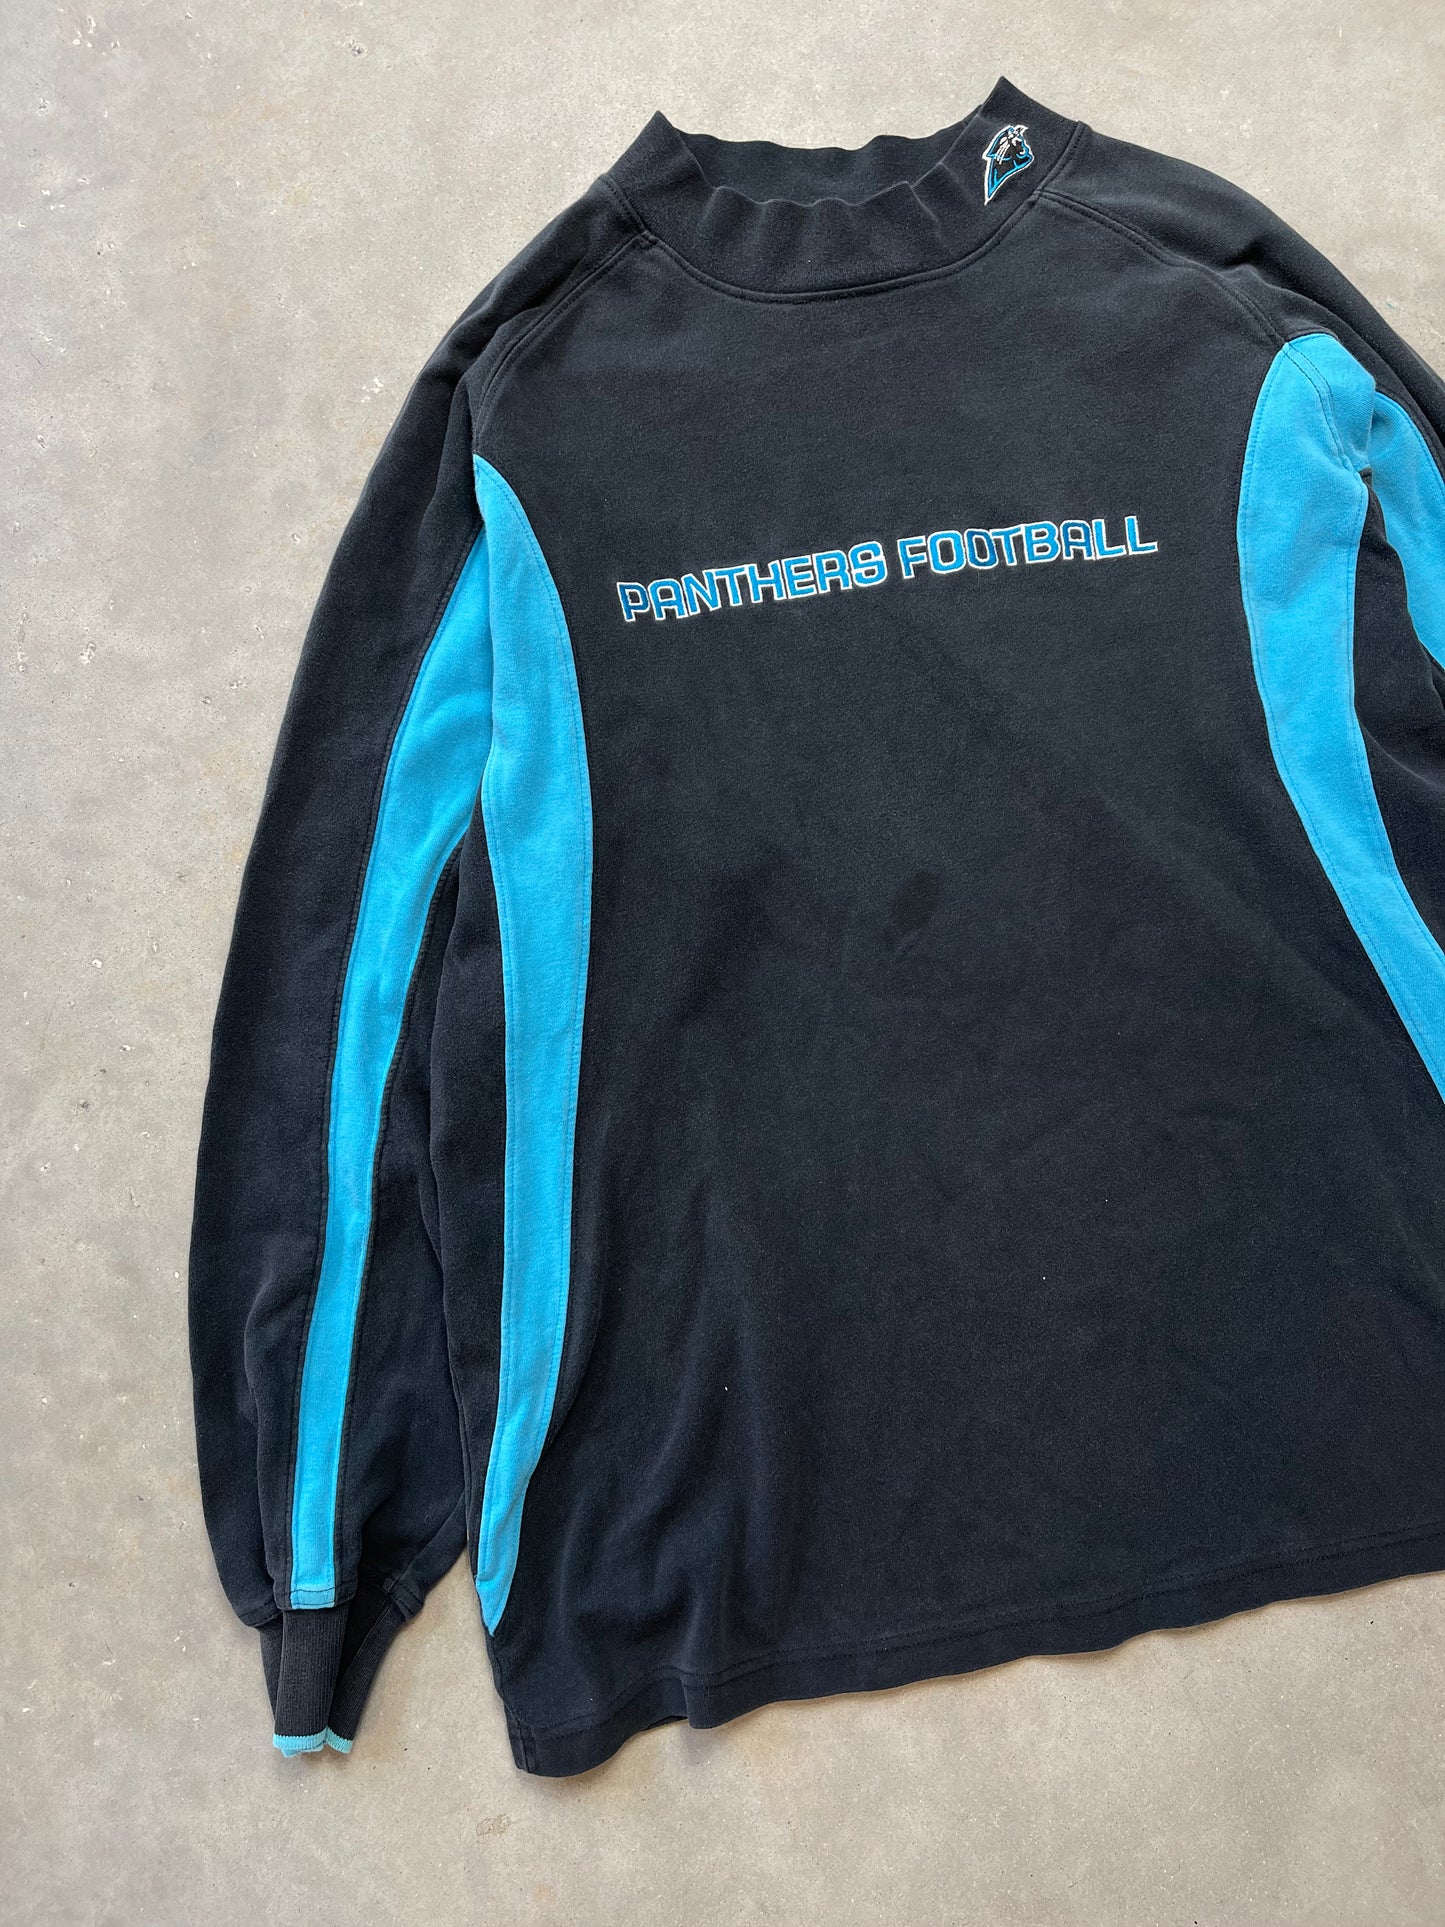 00's Carolina Panthers Embroidered Spellout Reebok Long Sleeve (Large)